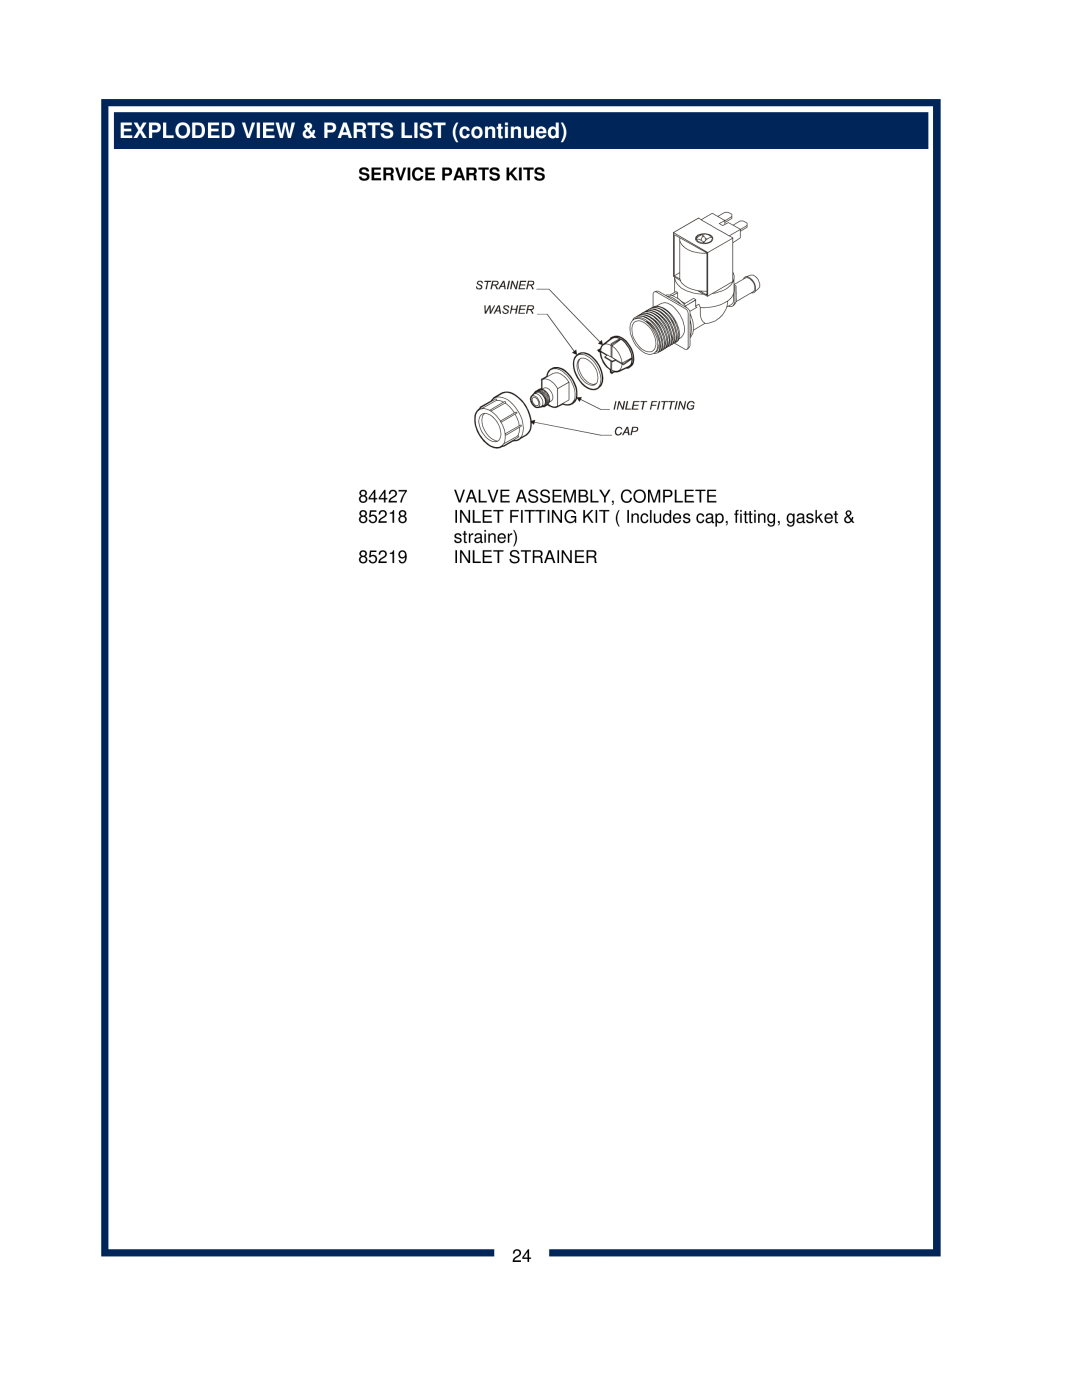 Bloomfield 9600 Single Cup owner manual EXPLODED VIEW & PARTS LIST continued, Service Parts Kits, Valve Assembly, Complete 